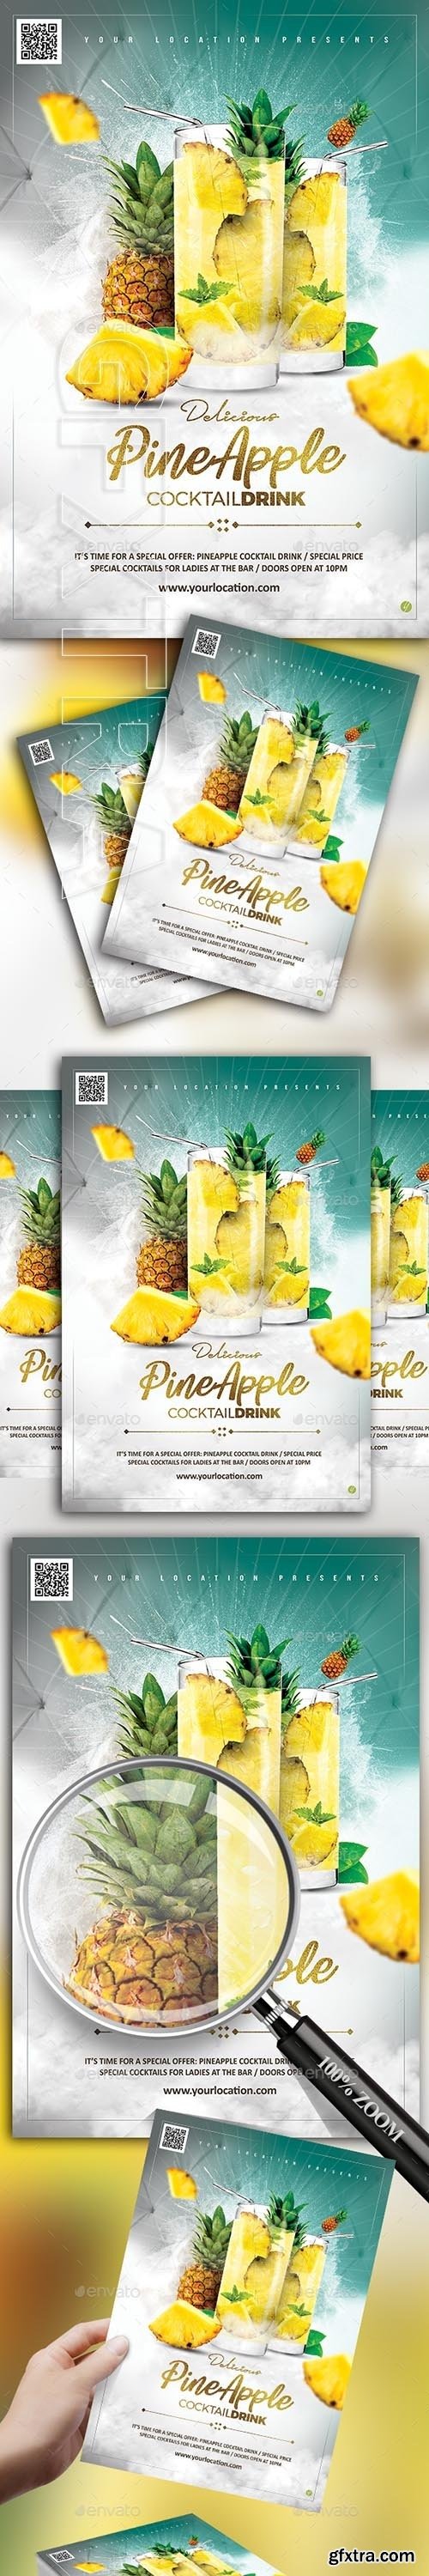 GraphicRiver - Pineapple Cocktail Drink Flyer 22363147